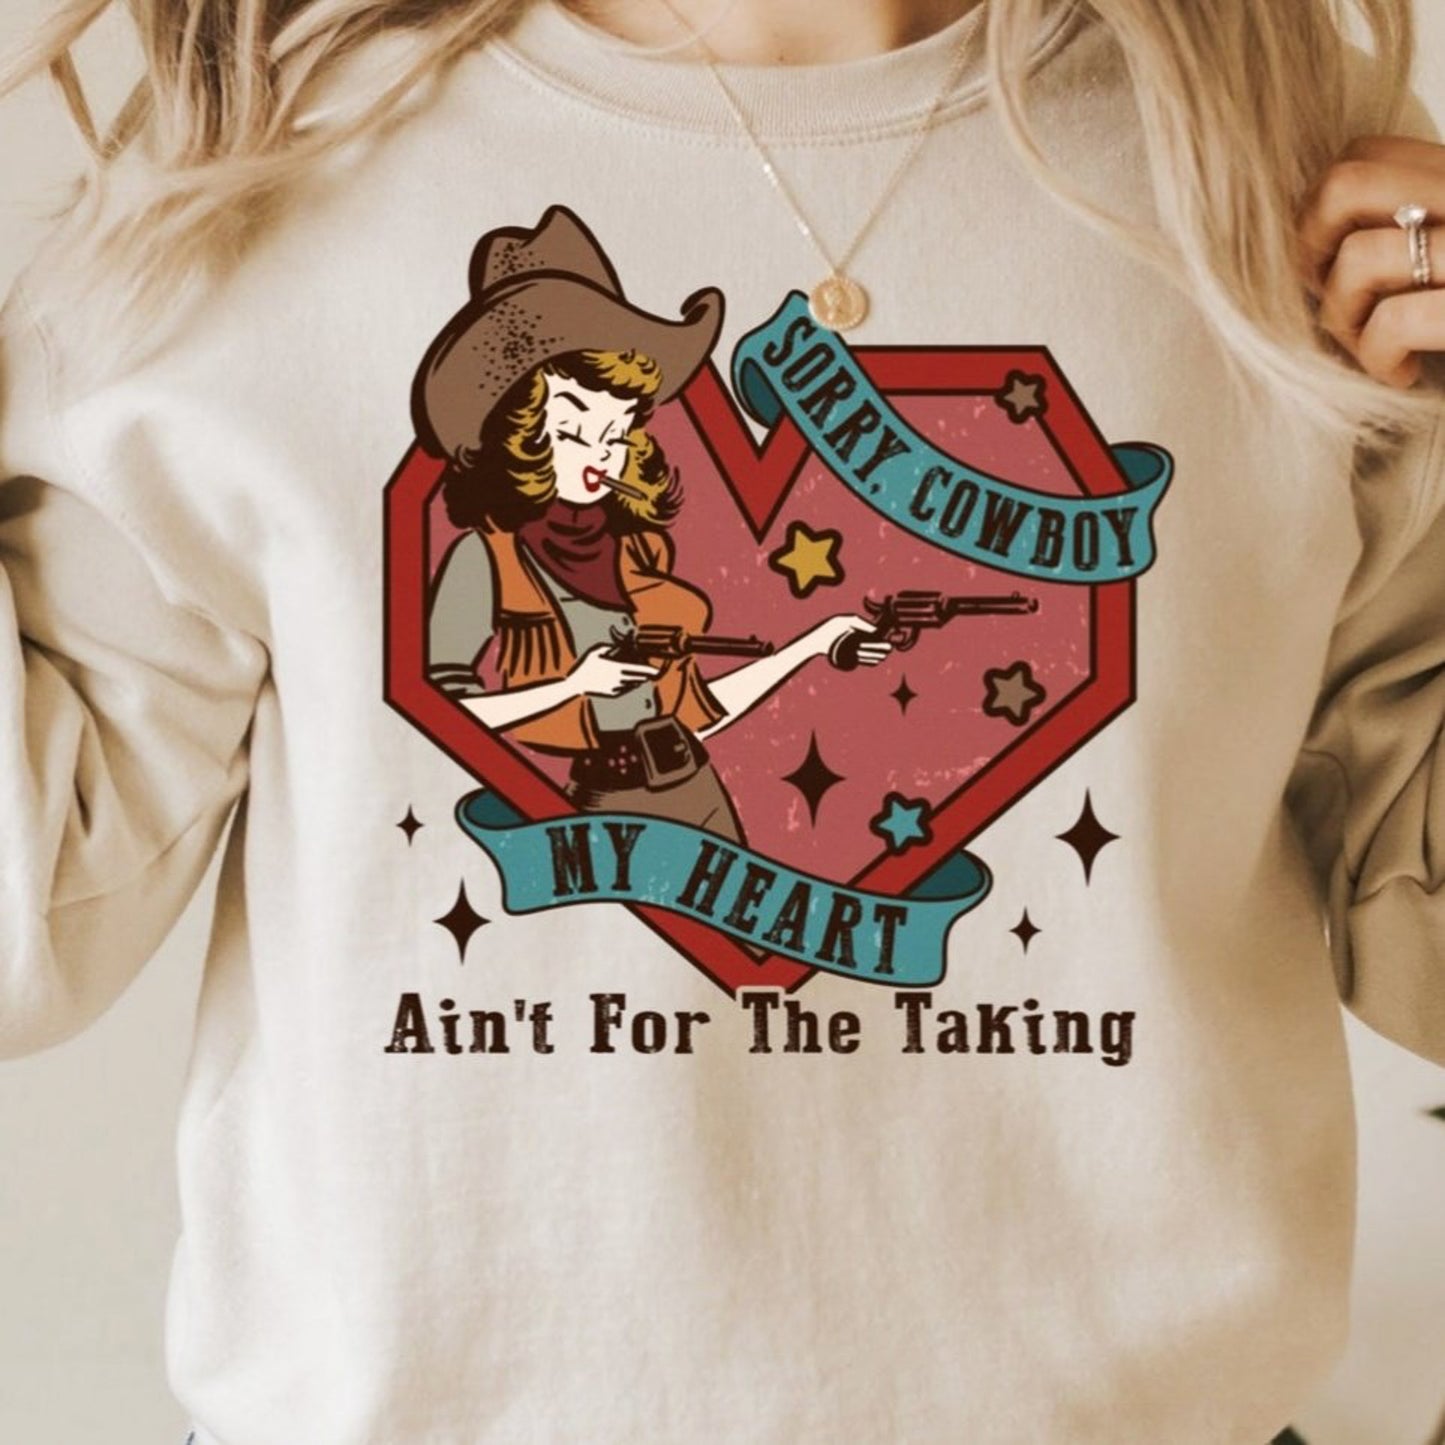 Sorry Cowboy My Heart Ain't For The Taking Crew Sweatshirt